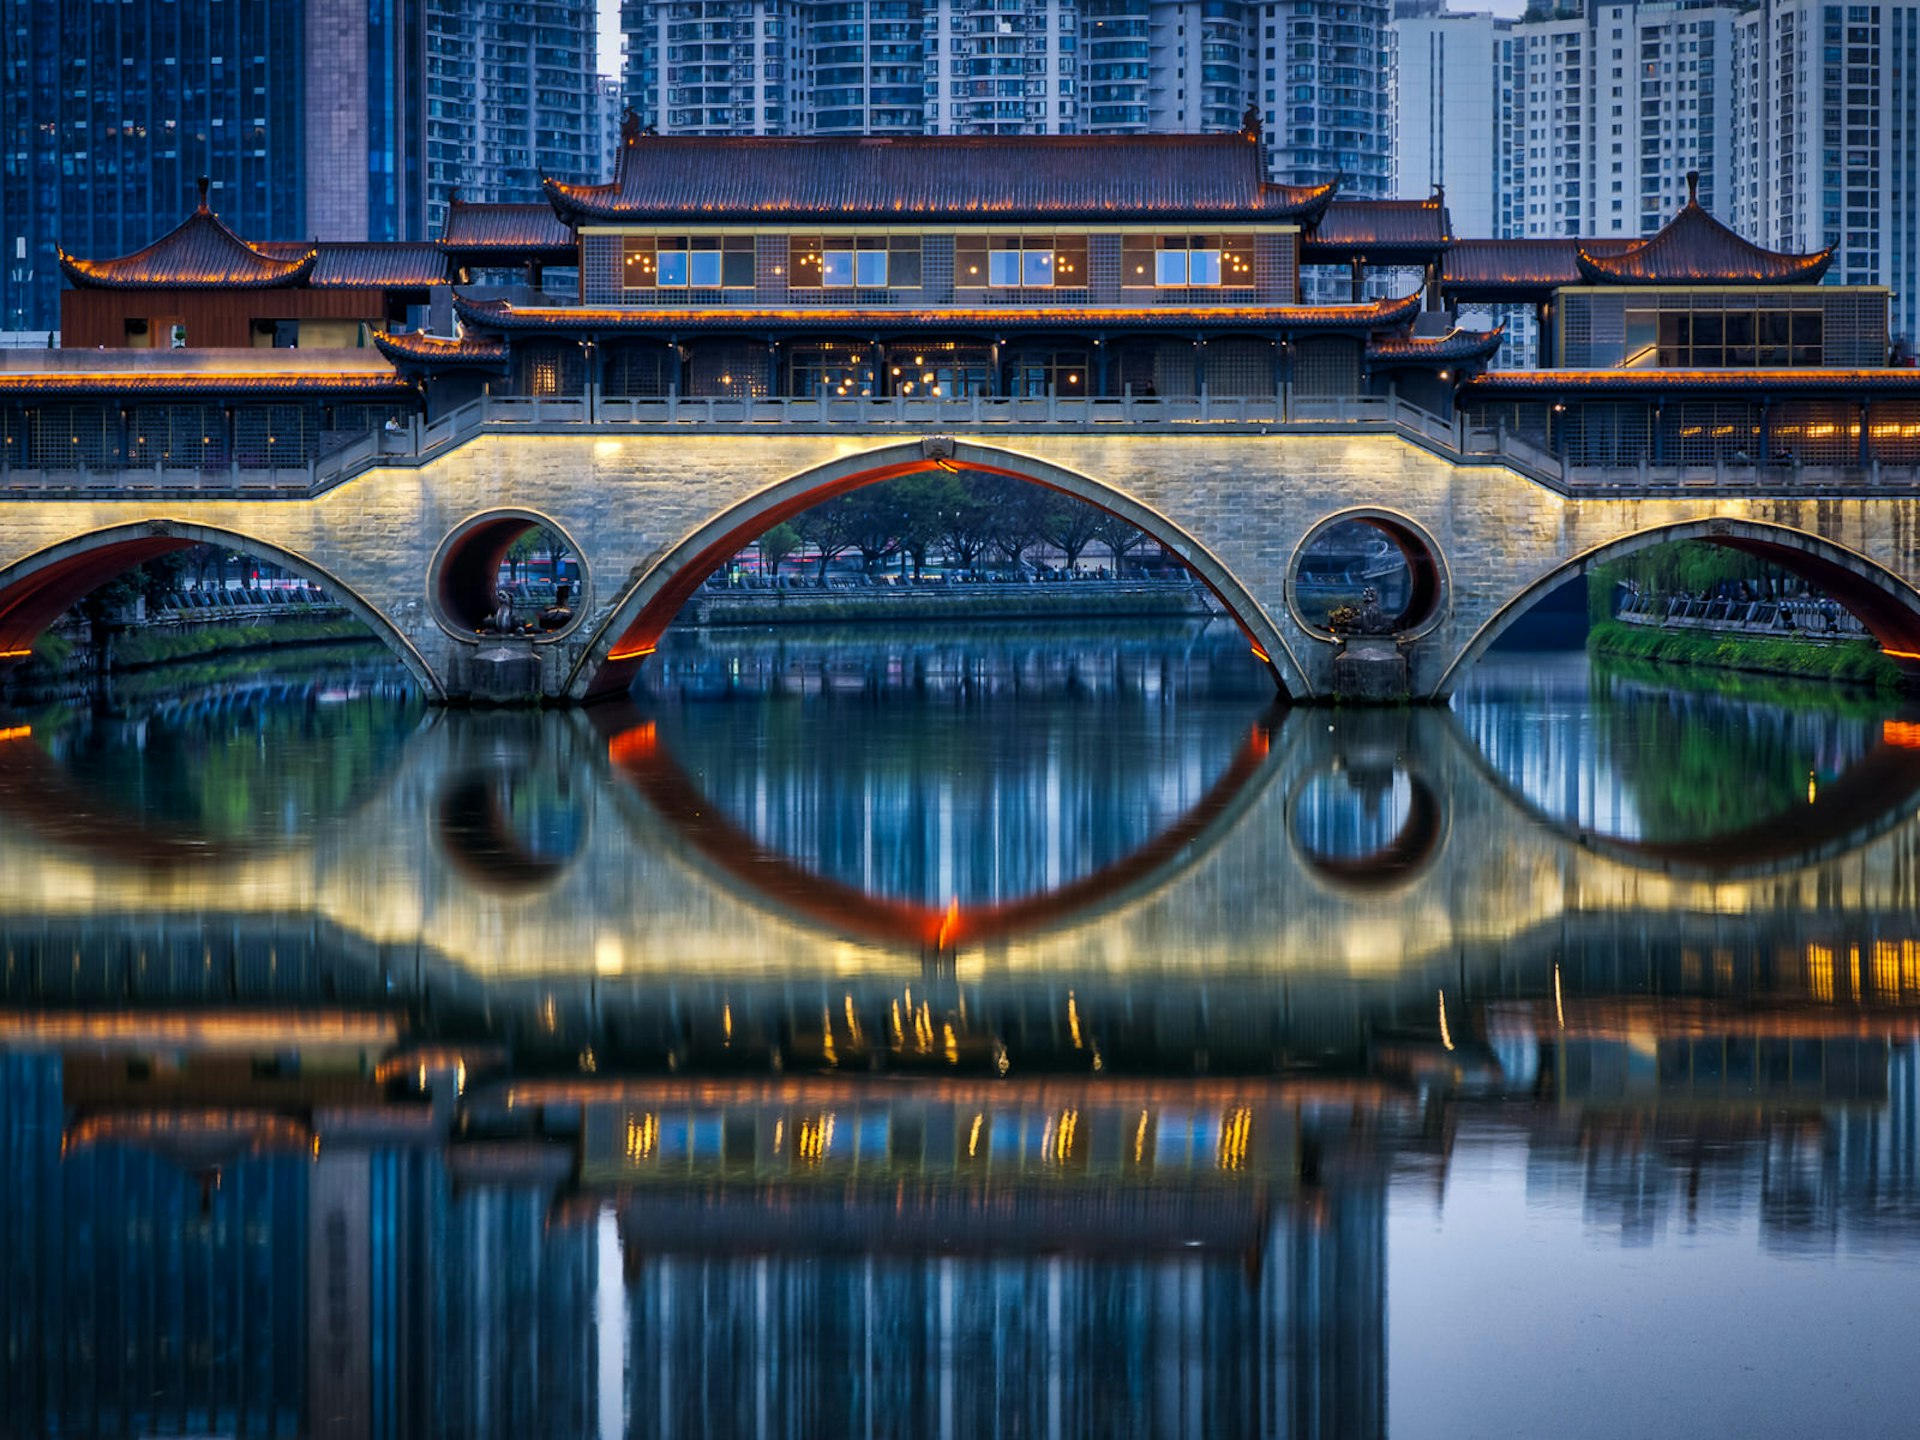 A covered Chinese bridge with modern buildings in the background. Chengdu's Anshun Bridge was mentioned by Marco Polo in his 13th century writings about China © Nick Wonnell / Shutterstock